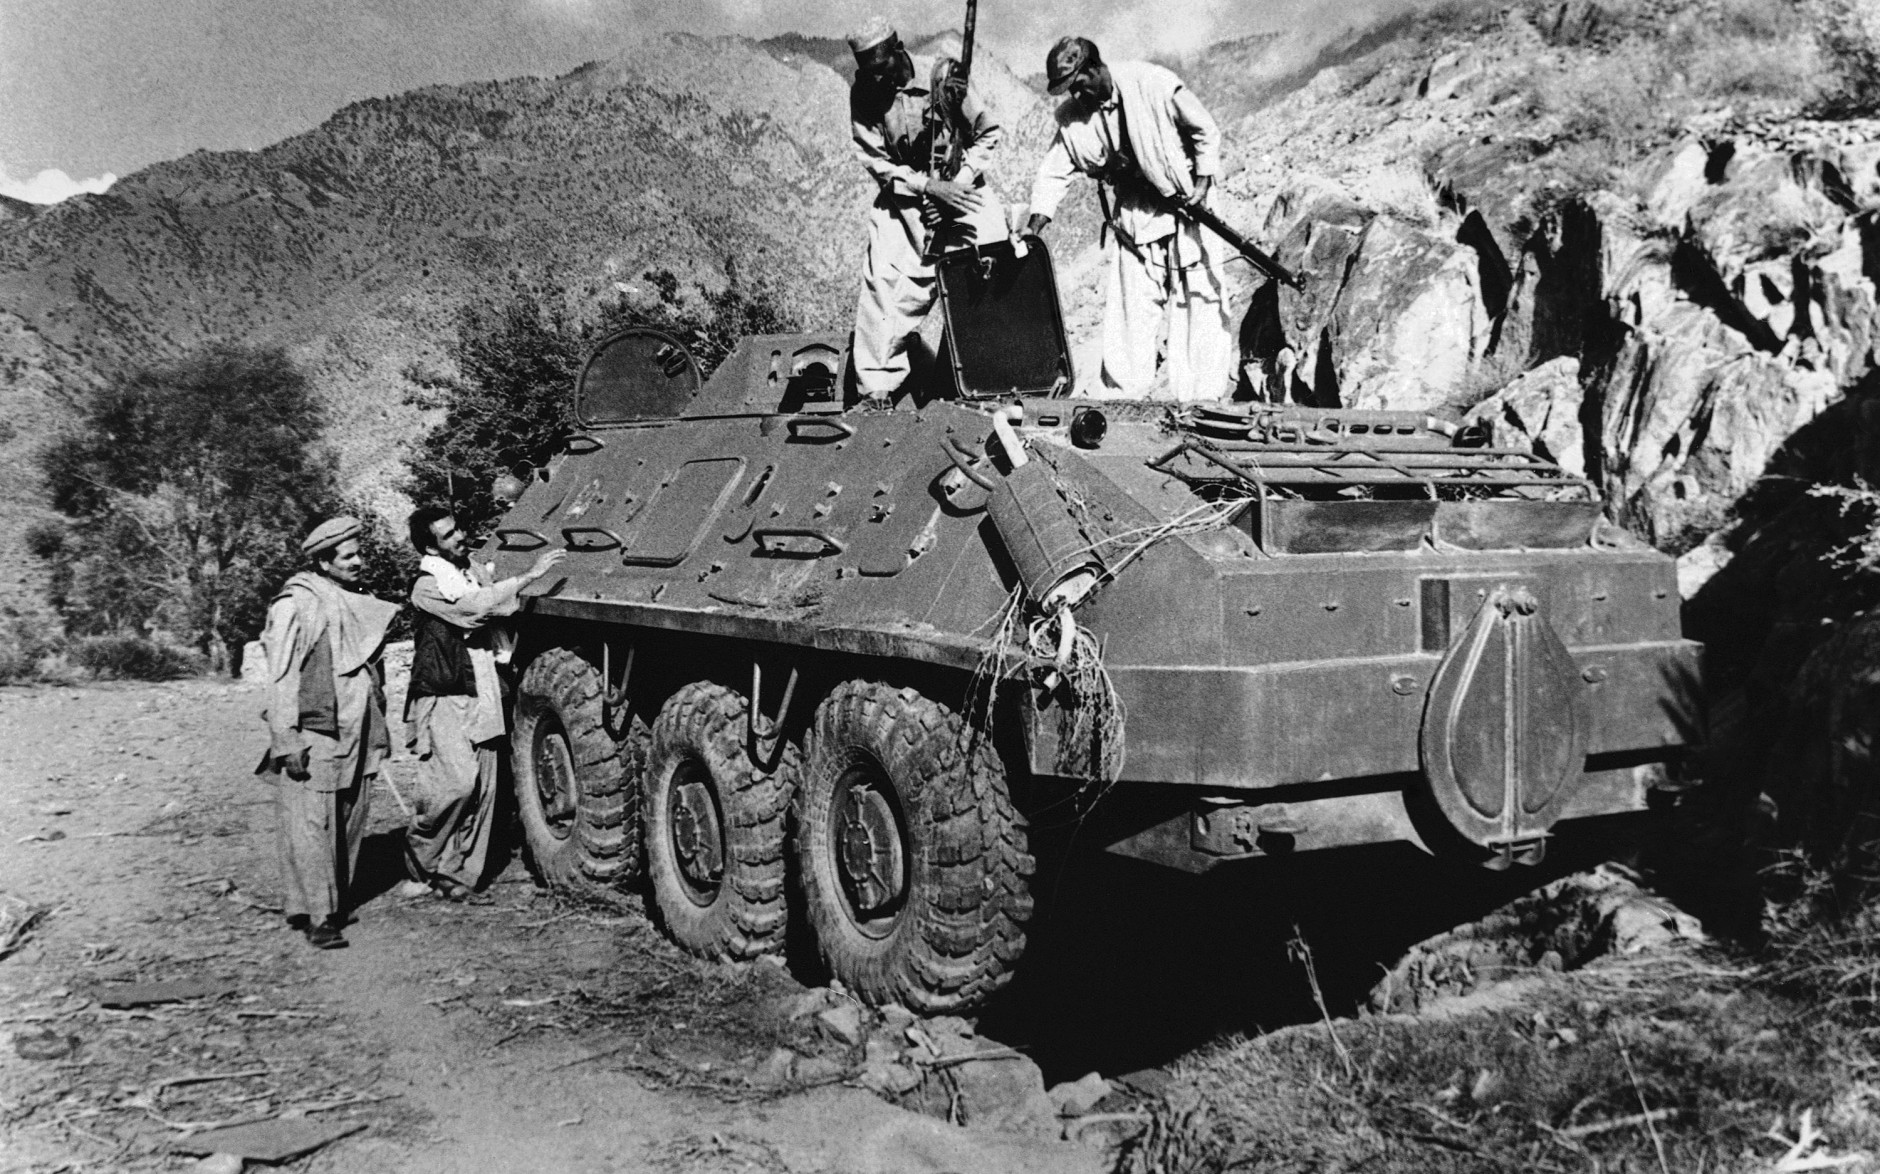 Rebel Muslim fighters inspect a Soviet tank captured in fighting with the Kabul government forces on September near Asmar, Afghanistan on Thursday, Dec. 27, 1979. The Kabul government of Hafizaullah Amin was overthrown by former Deputy Prime Minister Babrak Karmal. (AP Photo/Steve McCurry)